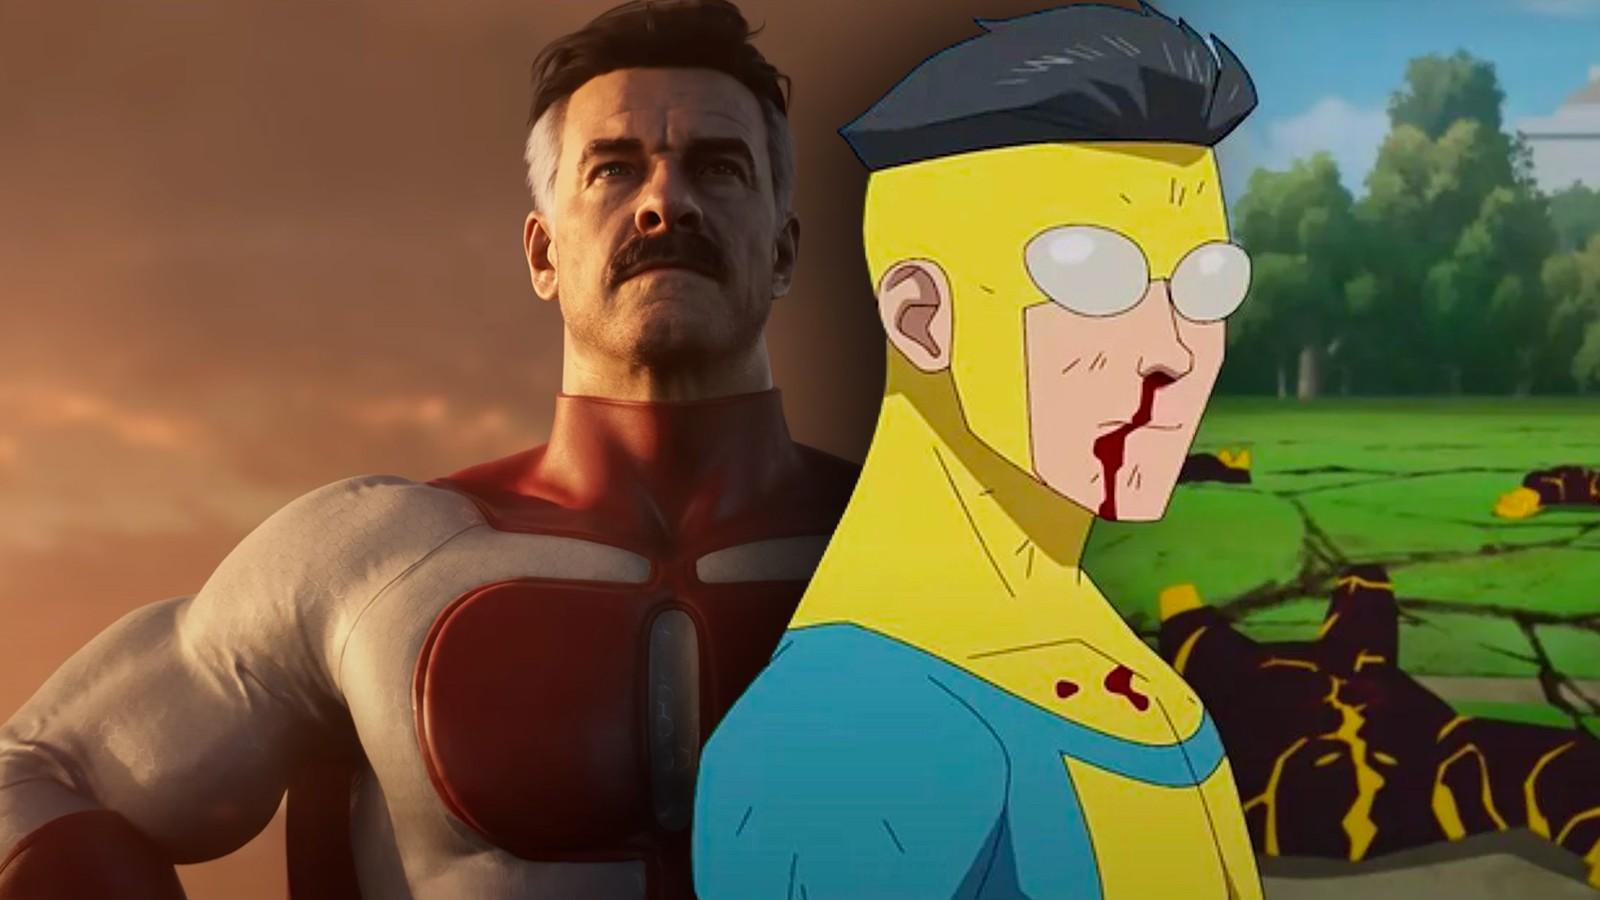 Invincible Season 2: Release Window, Cast and Everything We Know